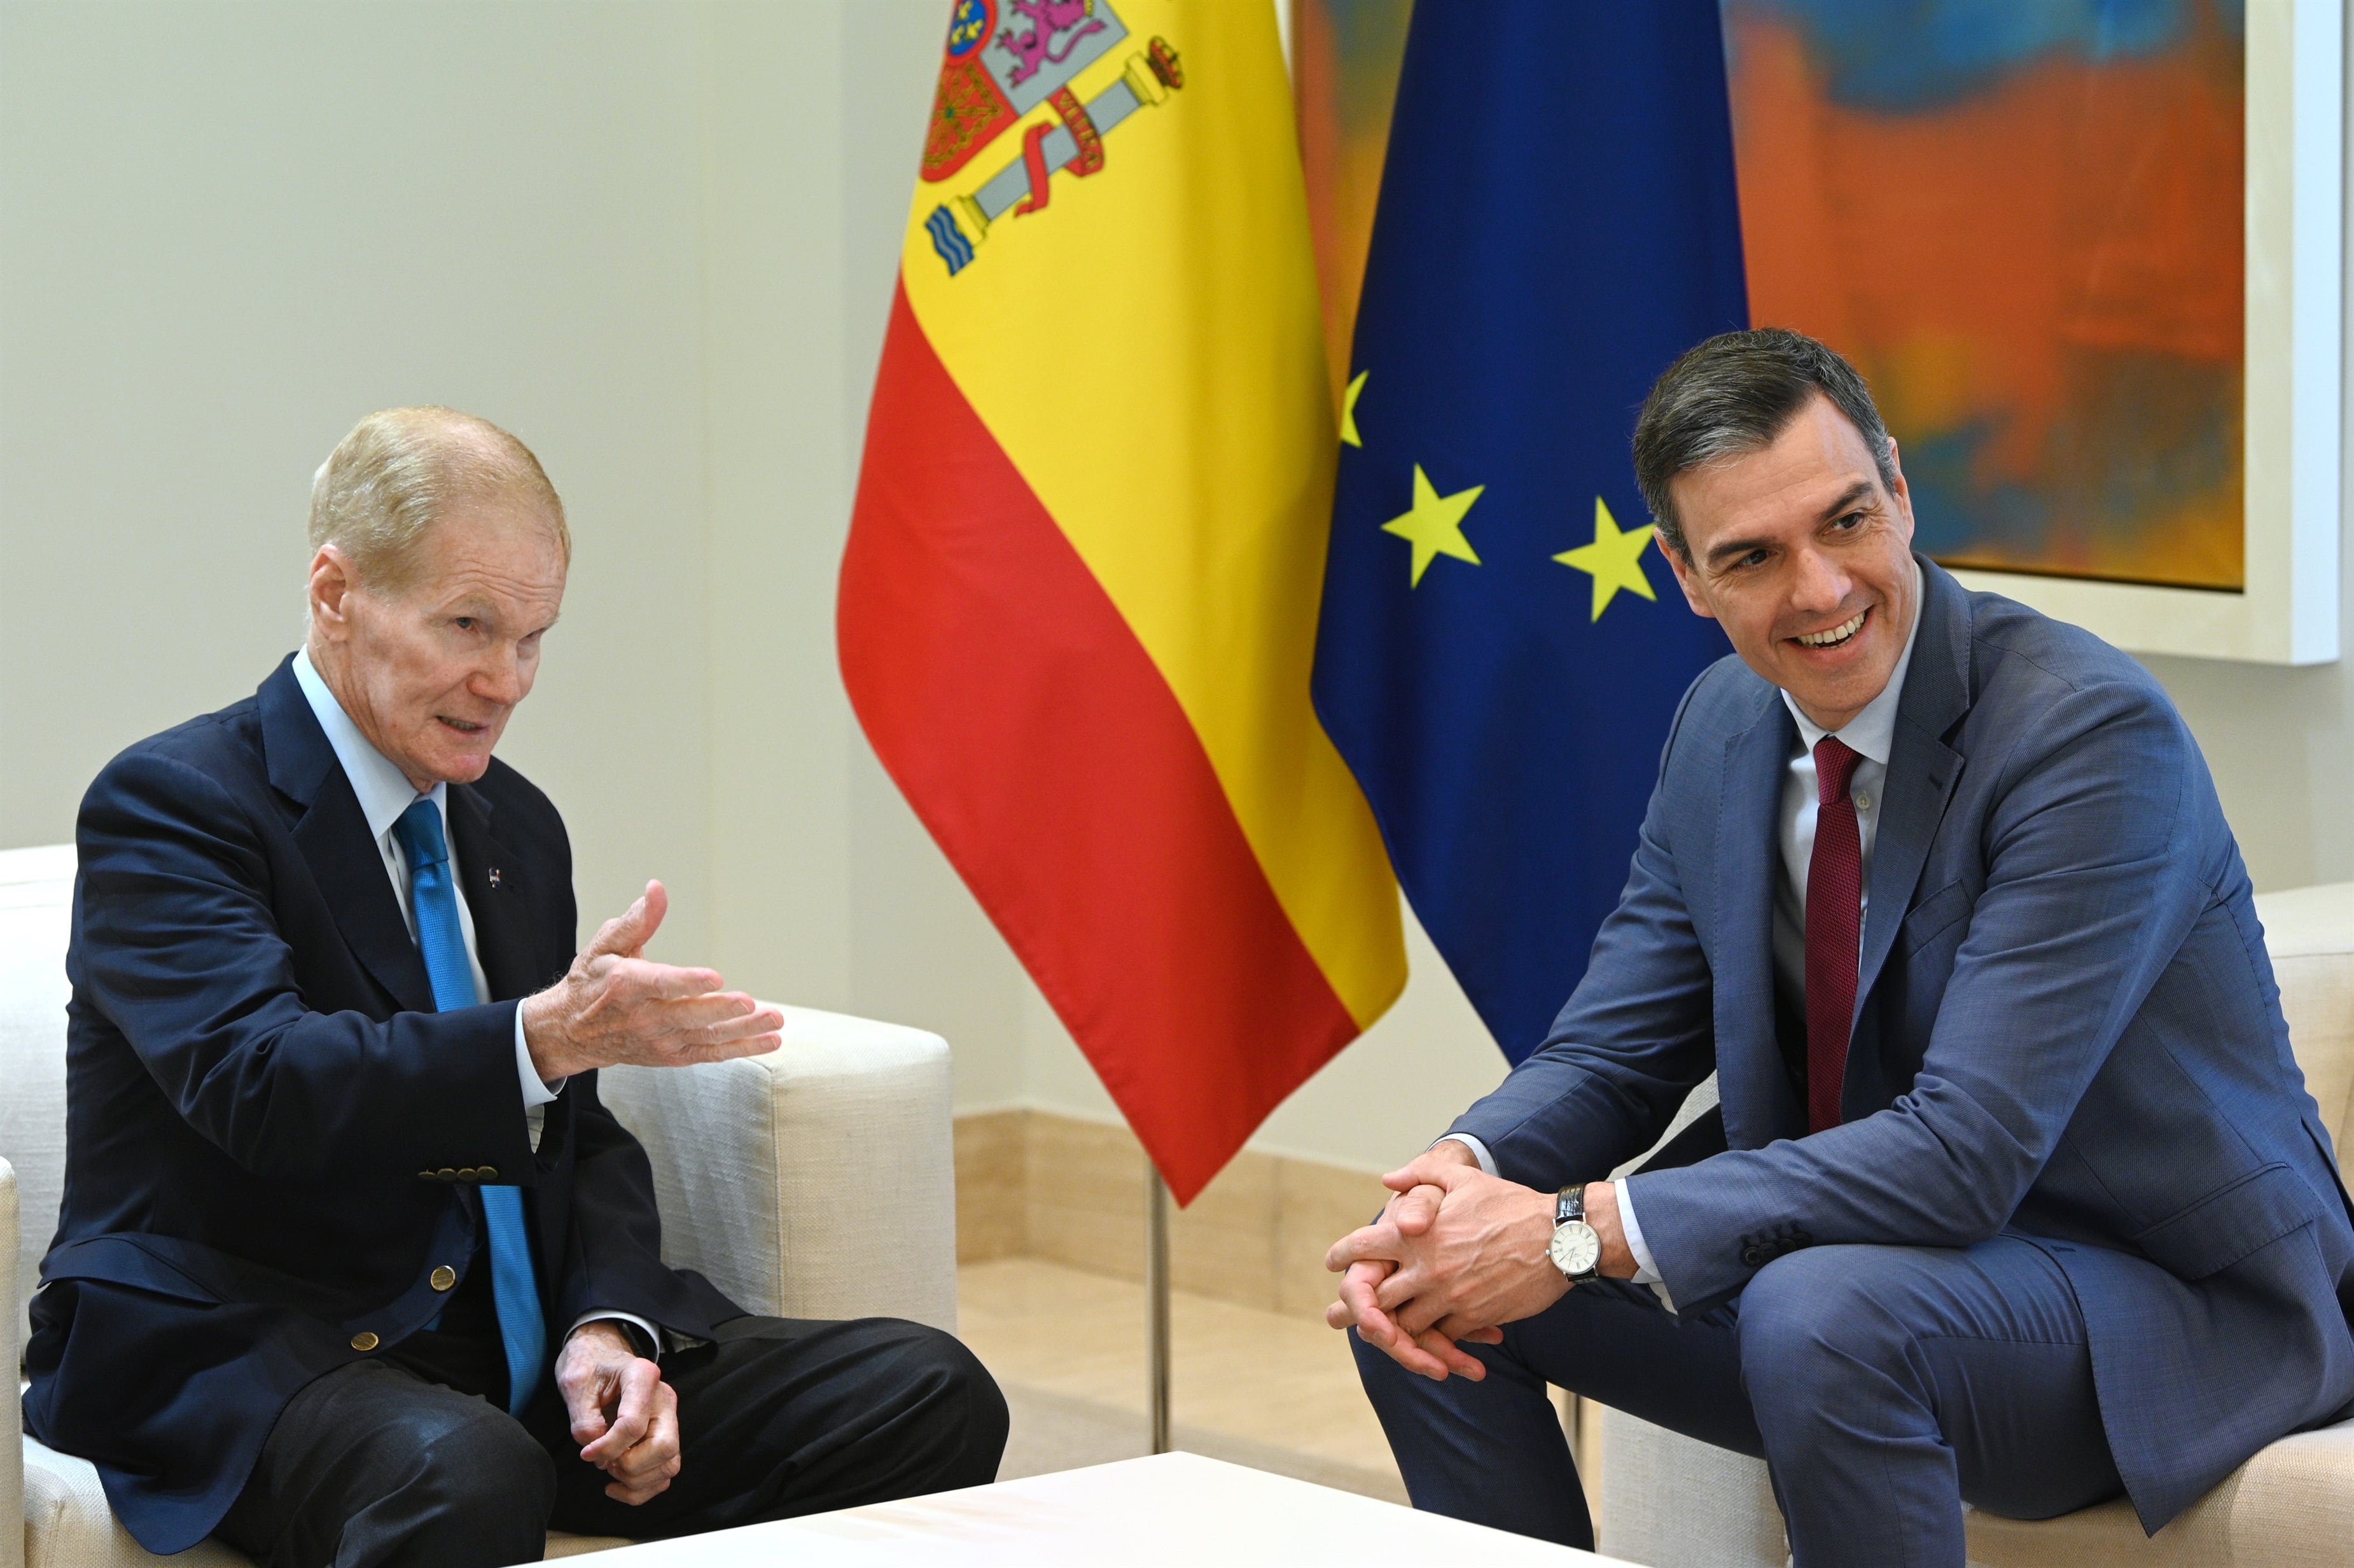 The Spanish Prime Minister Pedro Sánchez (right), and NASA’s Bill Nelson (left) in a meeting at the Moncloa Palace this Tuesday.